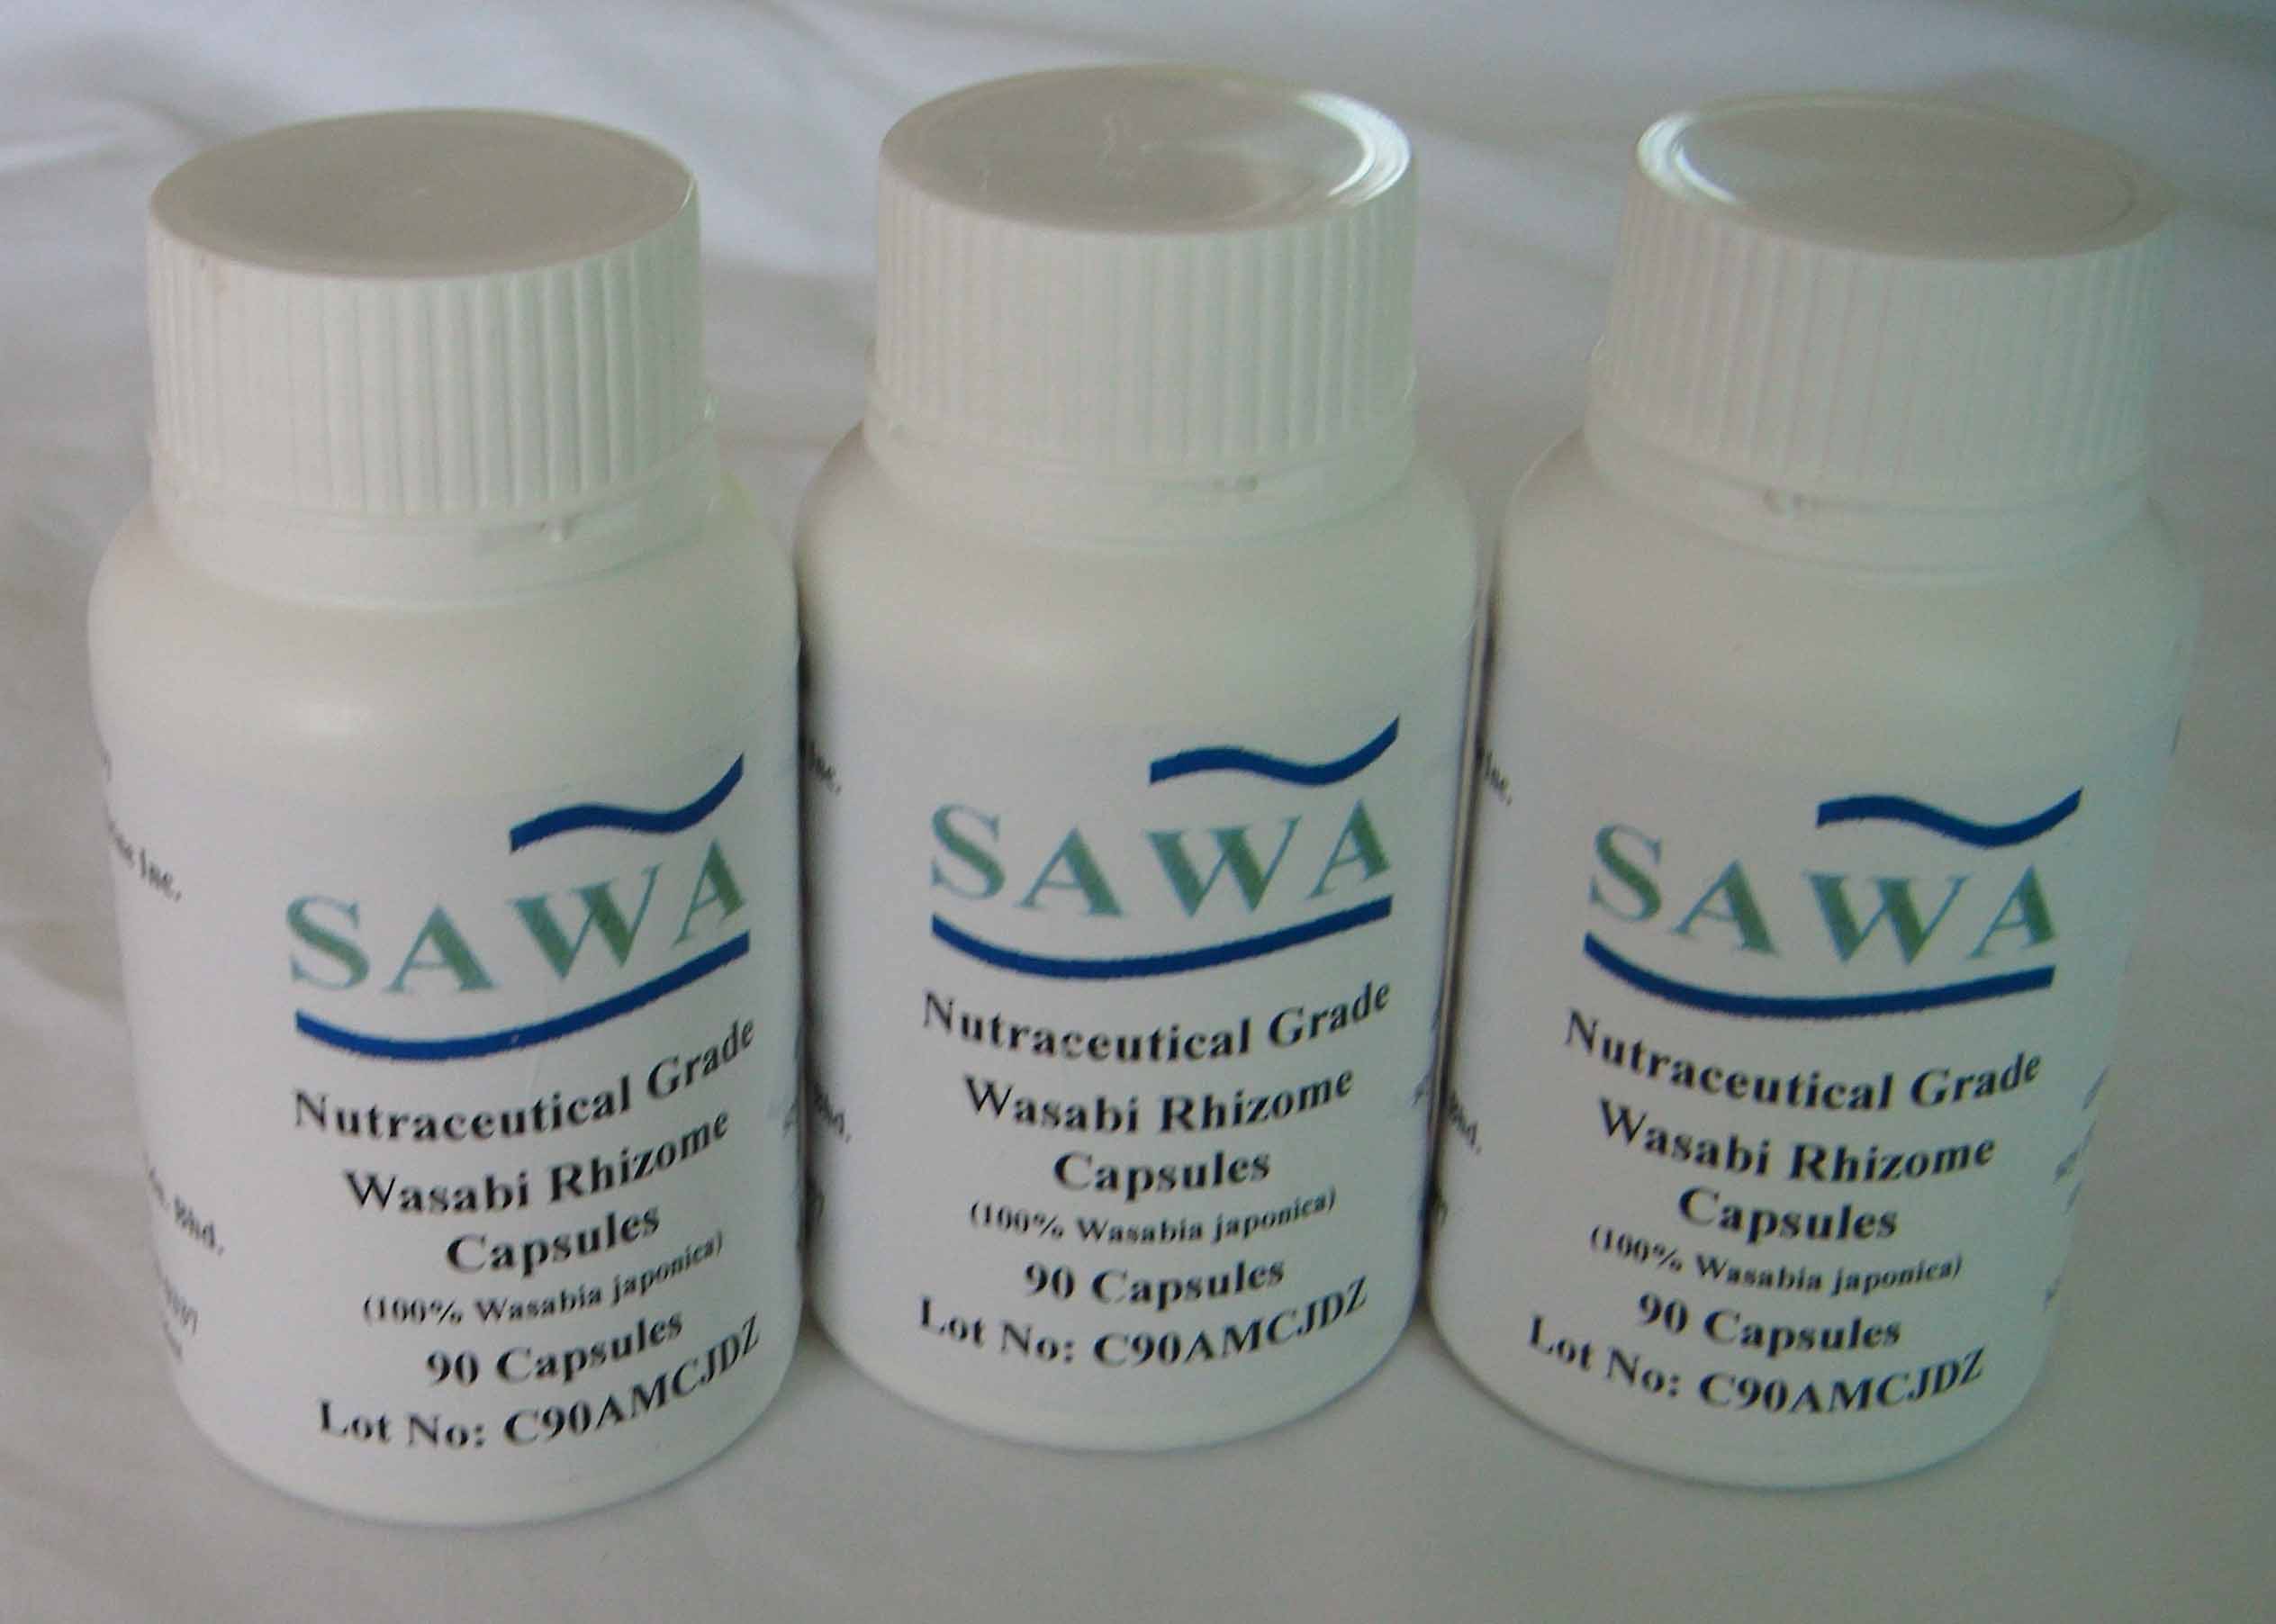 Sawa Wasabia japonica capsules. 90 capsules per jar. Shown to kill cancer cells and targeted to be a Functional Food..